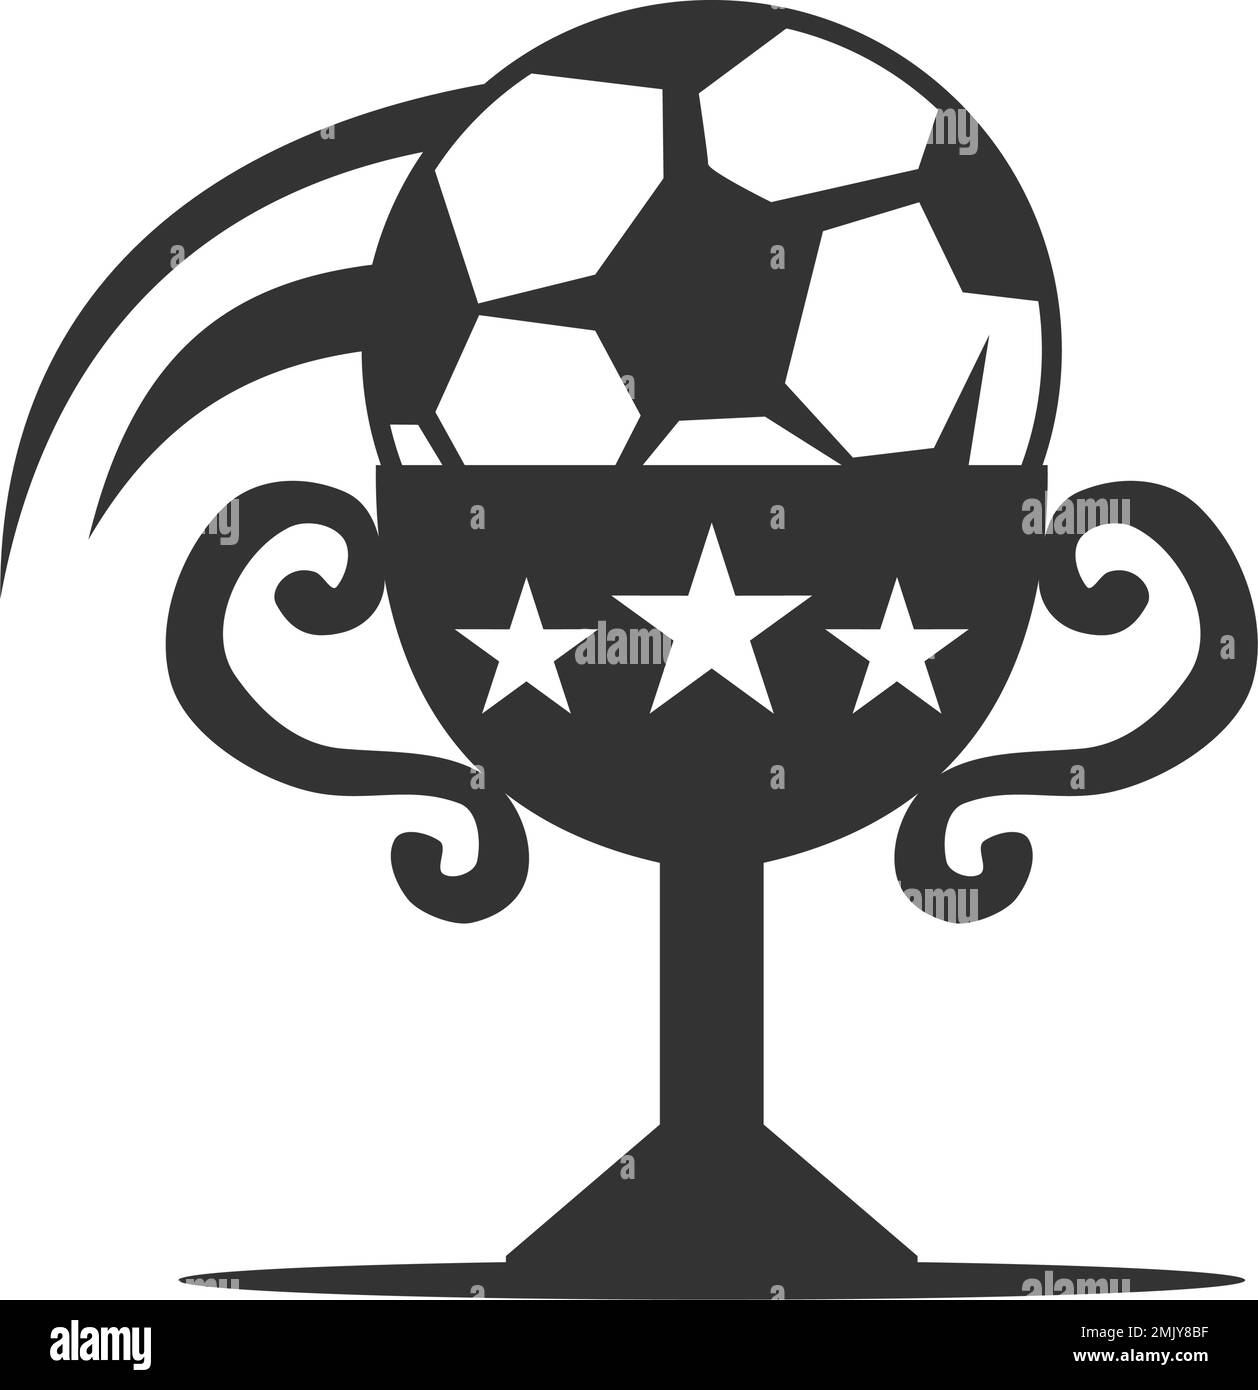 soccer football logo template Icon Illustration Brand Identity.Isolated and flat illustration. Vector graphic Stock Vector